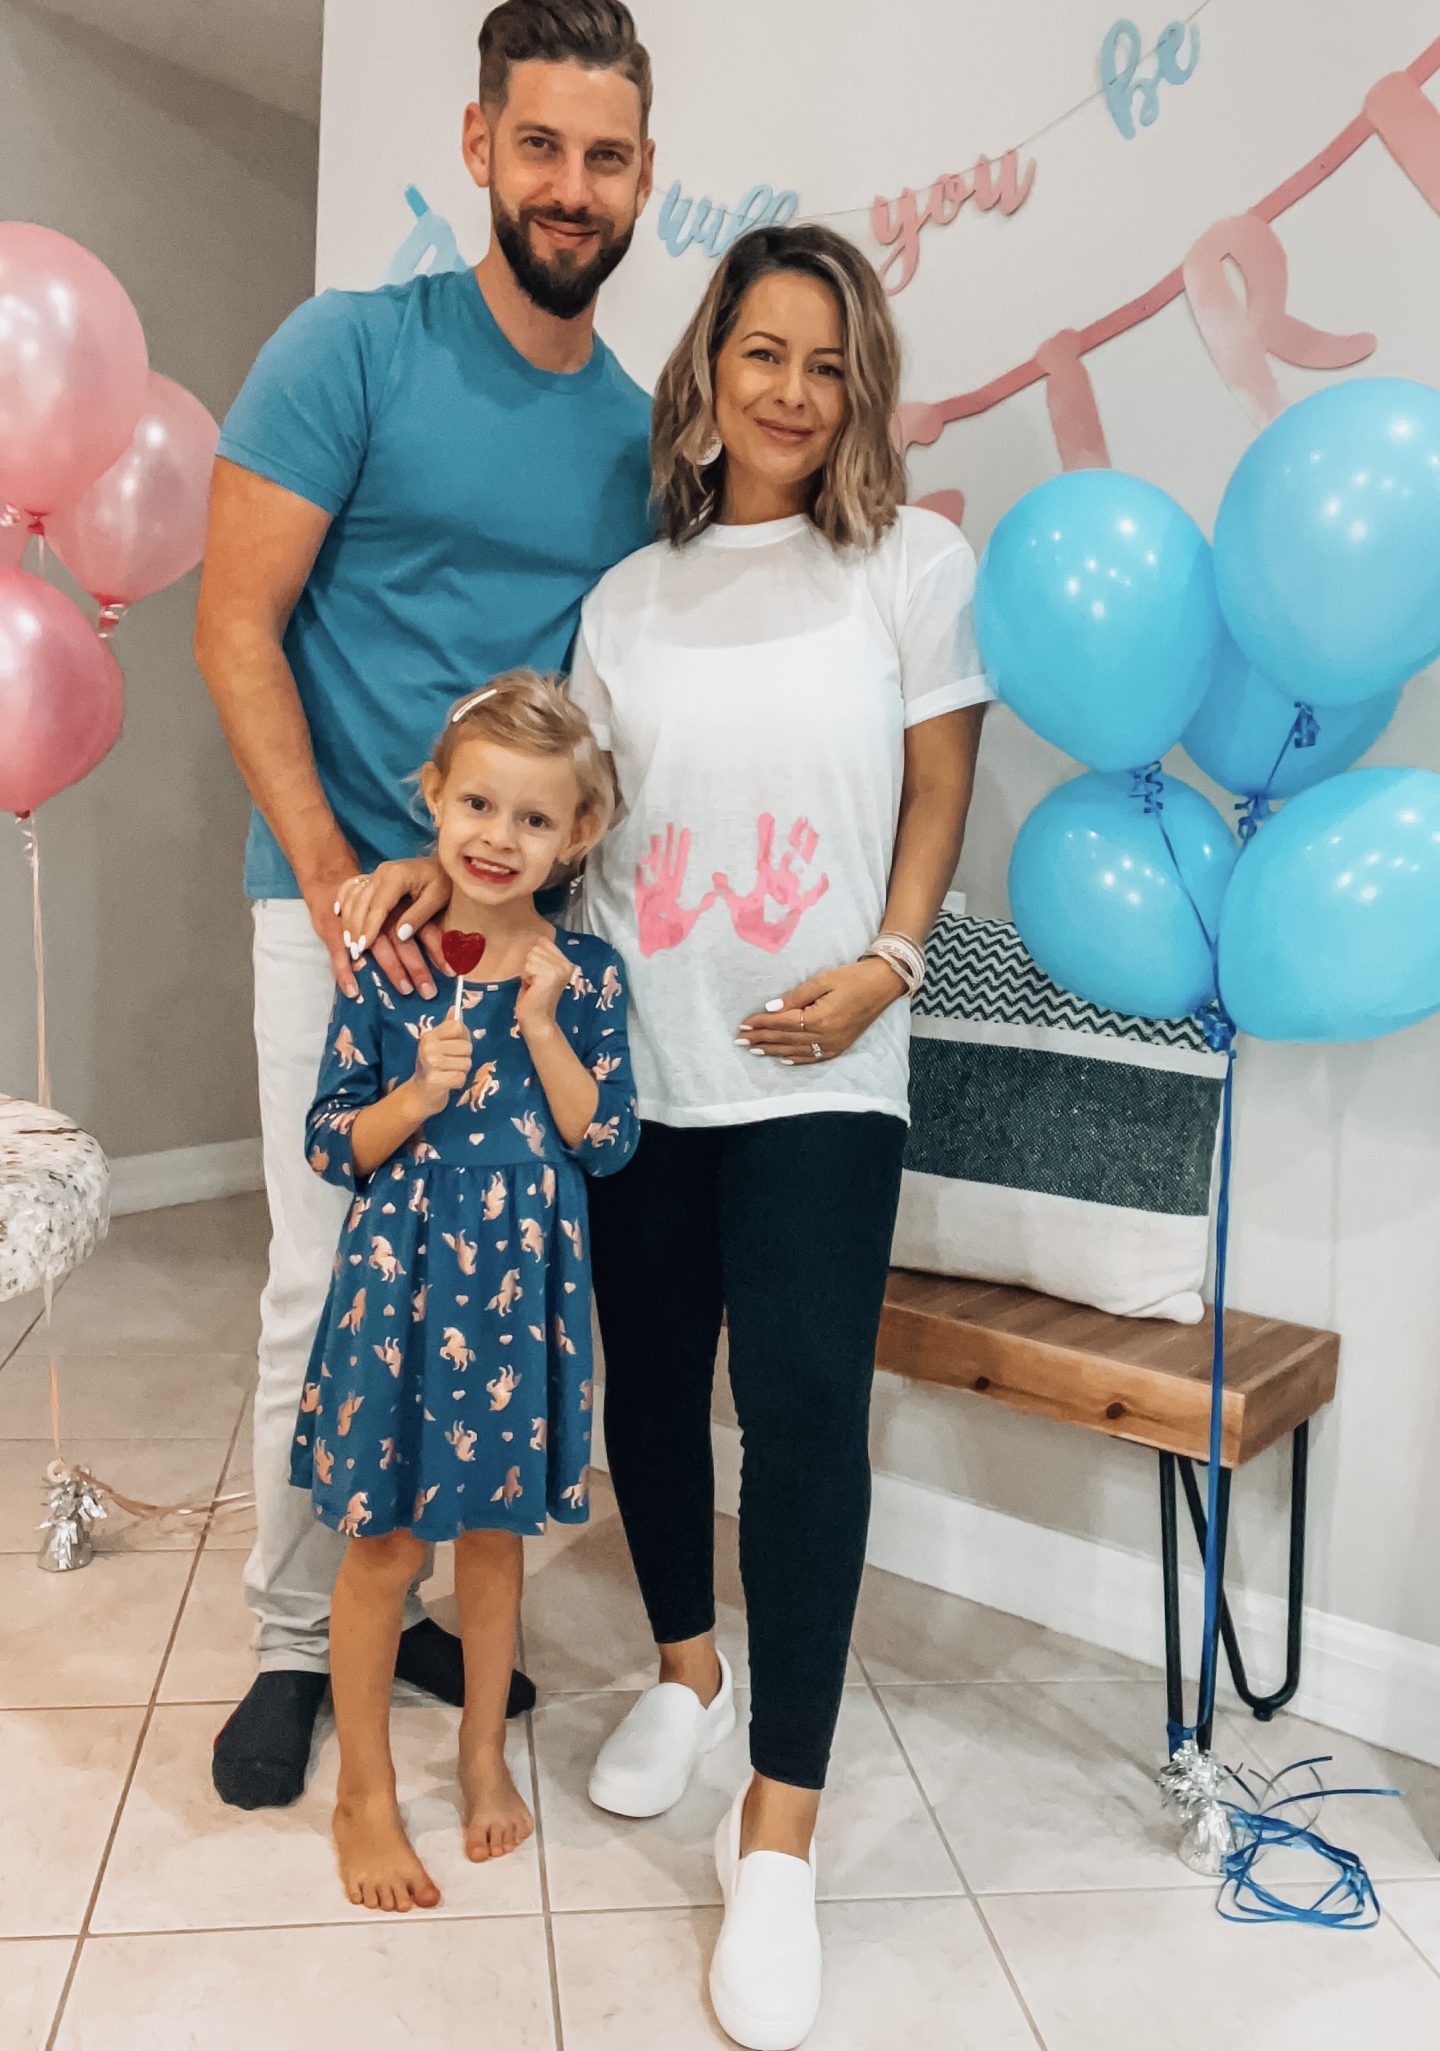 Our Gender Reveal + 28 Ideas for you!